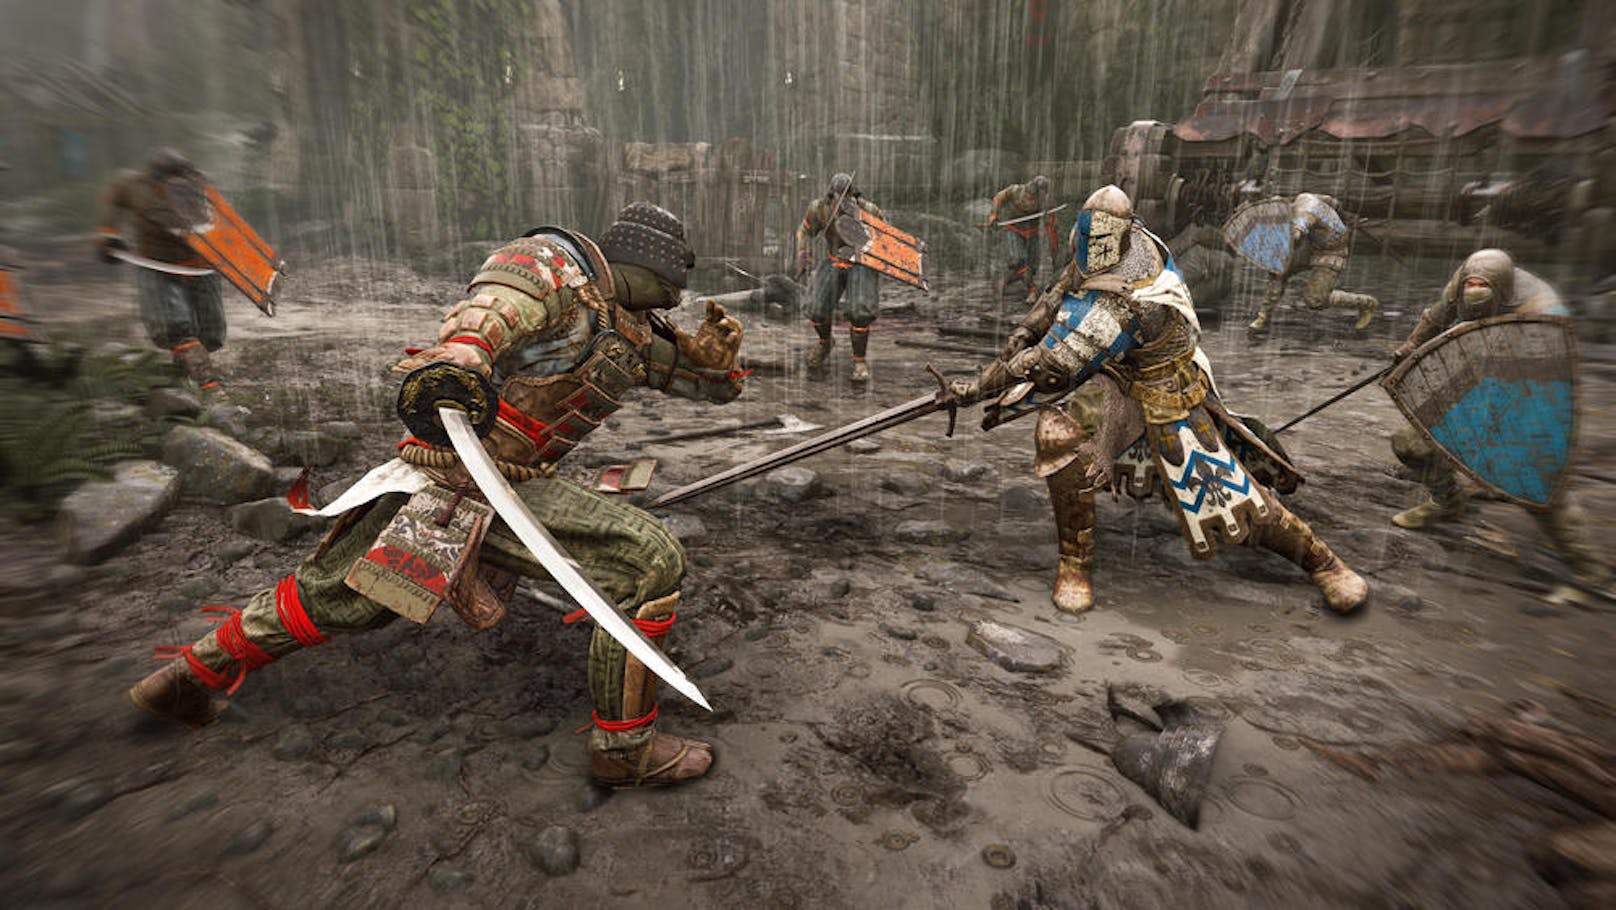  <a href="https://www.heute.at/digital/games/story/For-Honor-im-Test--Blutiges-Schlacht-Gemetzel-13465872" target="_blank">For Honor</a>